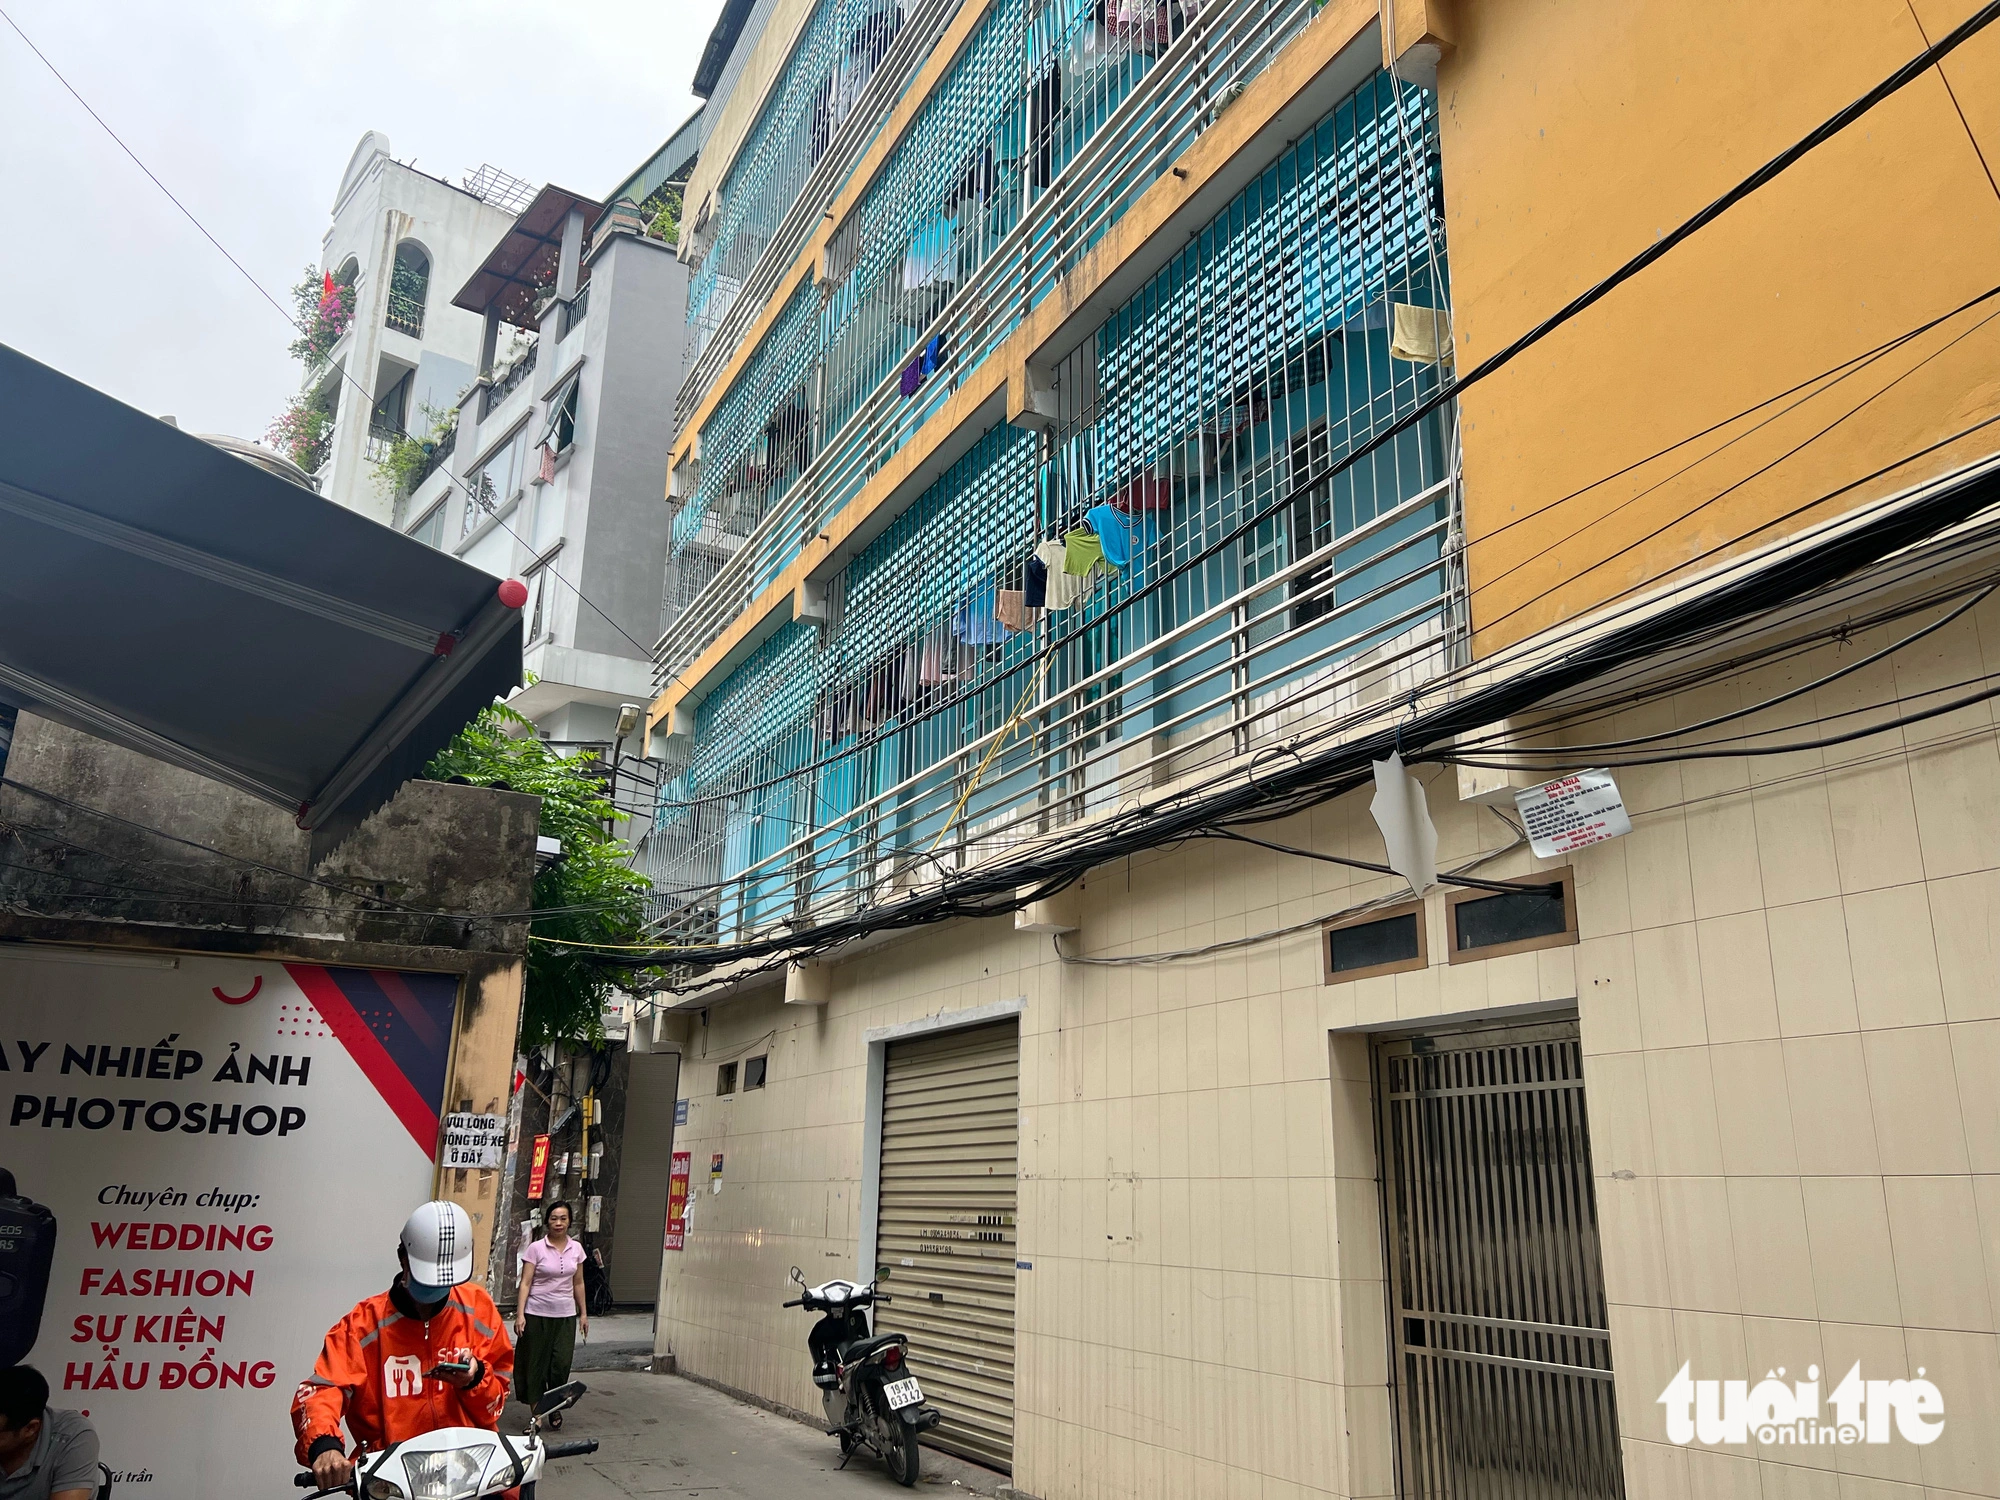 These iron cages will hinder residents’ escape efforts in case of fires. Photo: Pham Tuan / Tuoi Tre